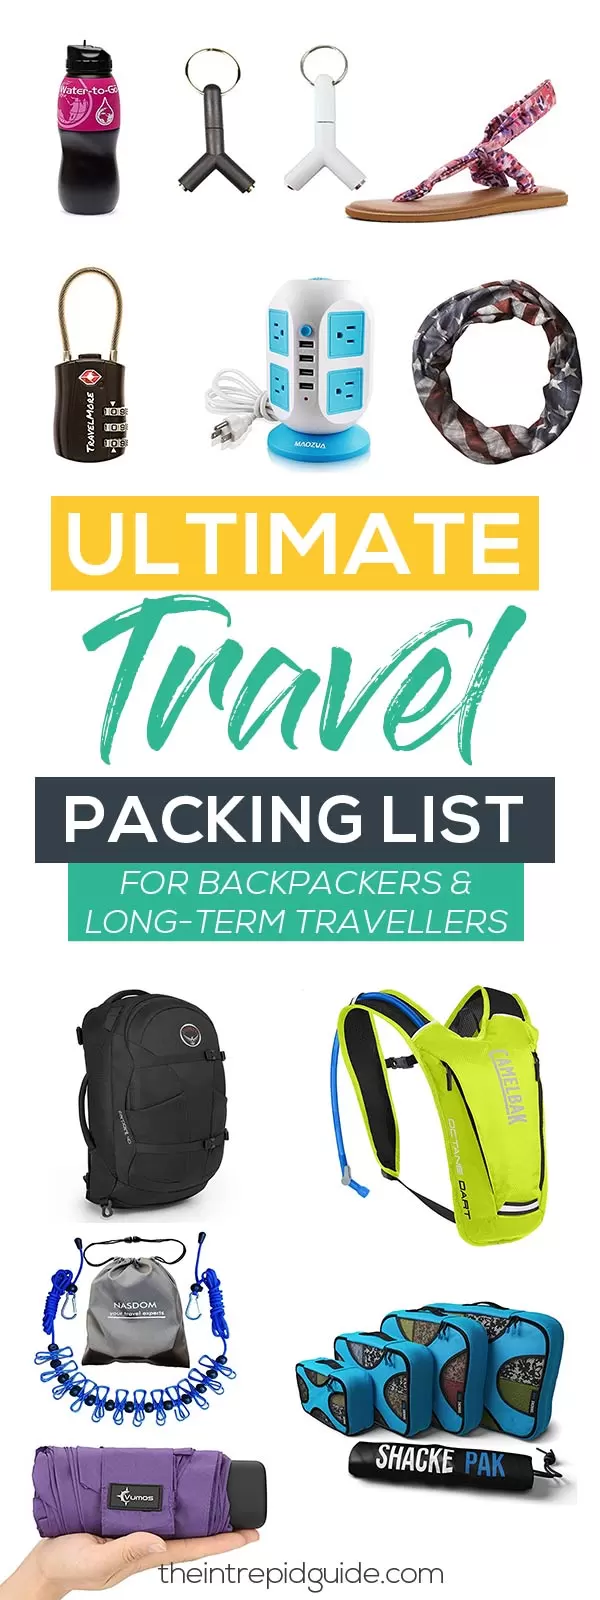 Ultimate Travel Packing List for Backpackers 2021